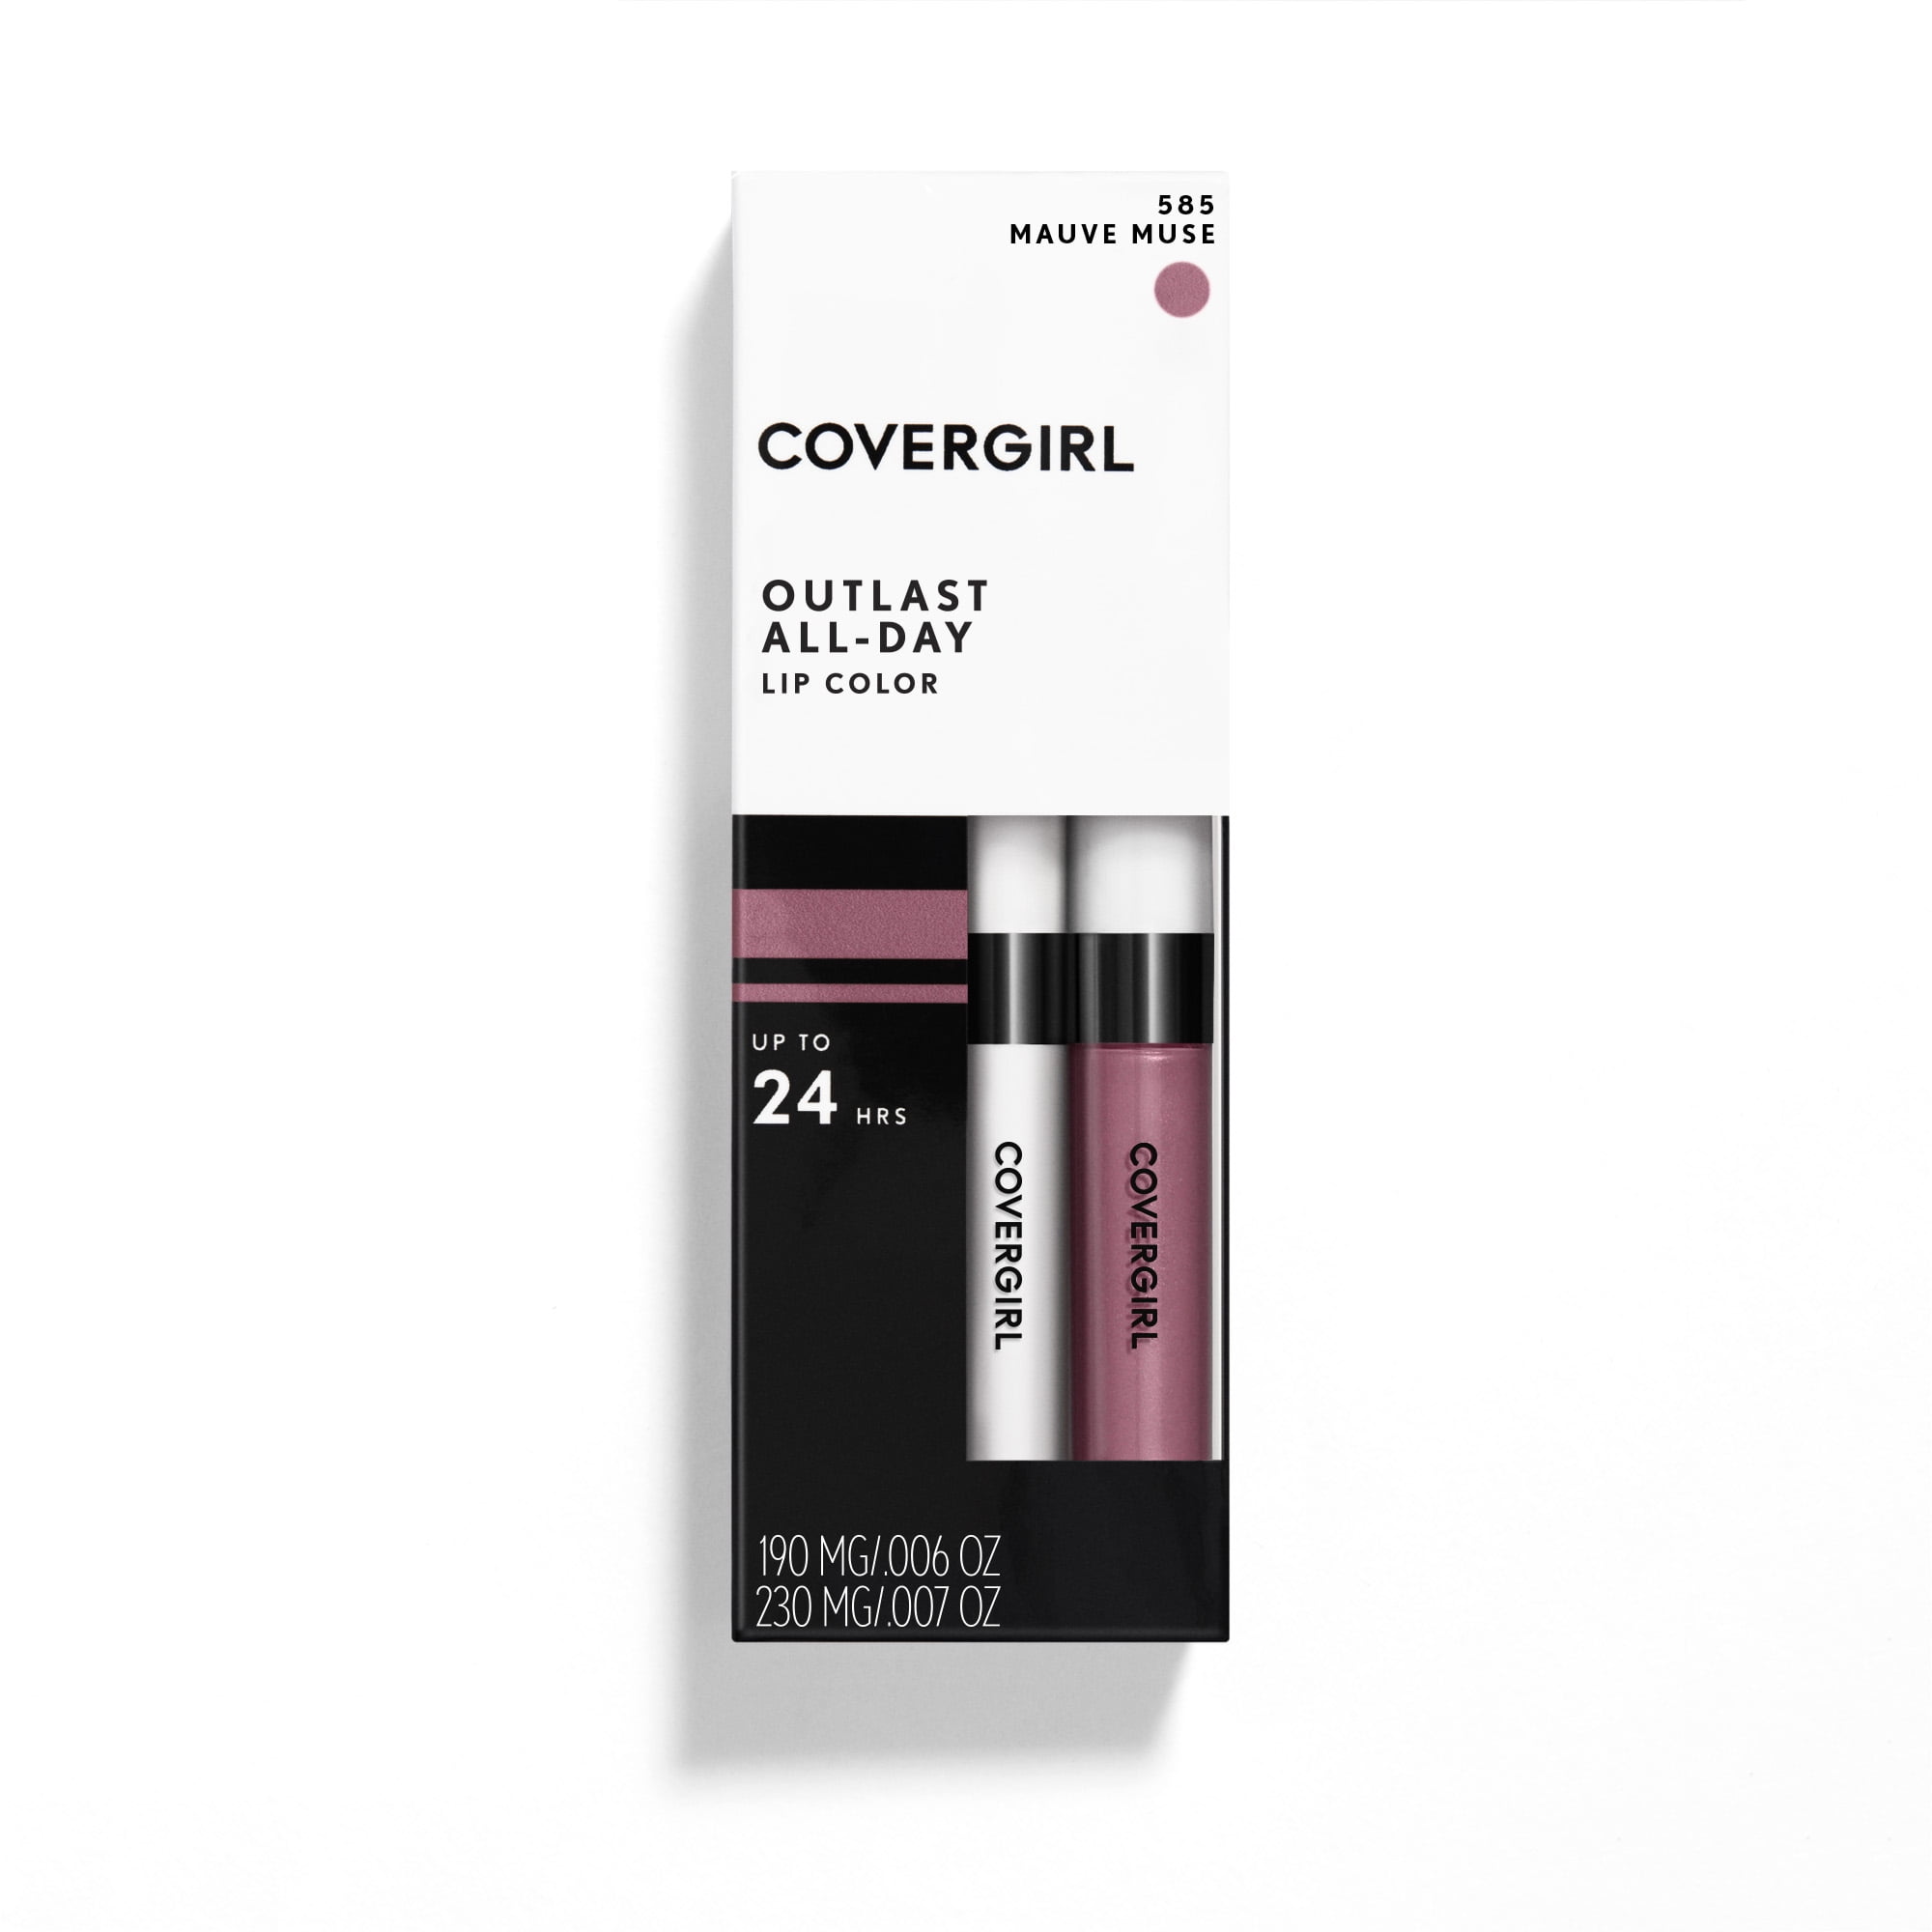 Covergirl Outlast Lipstick Color Chart